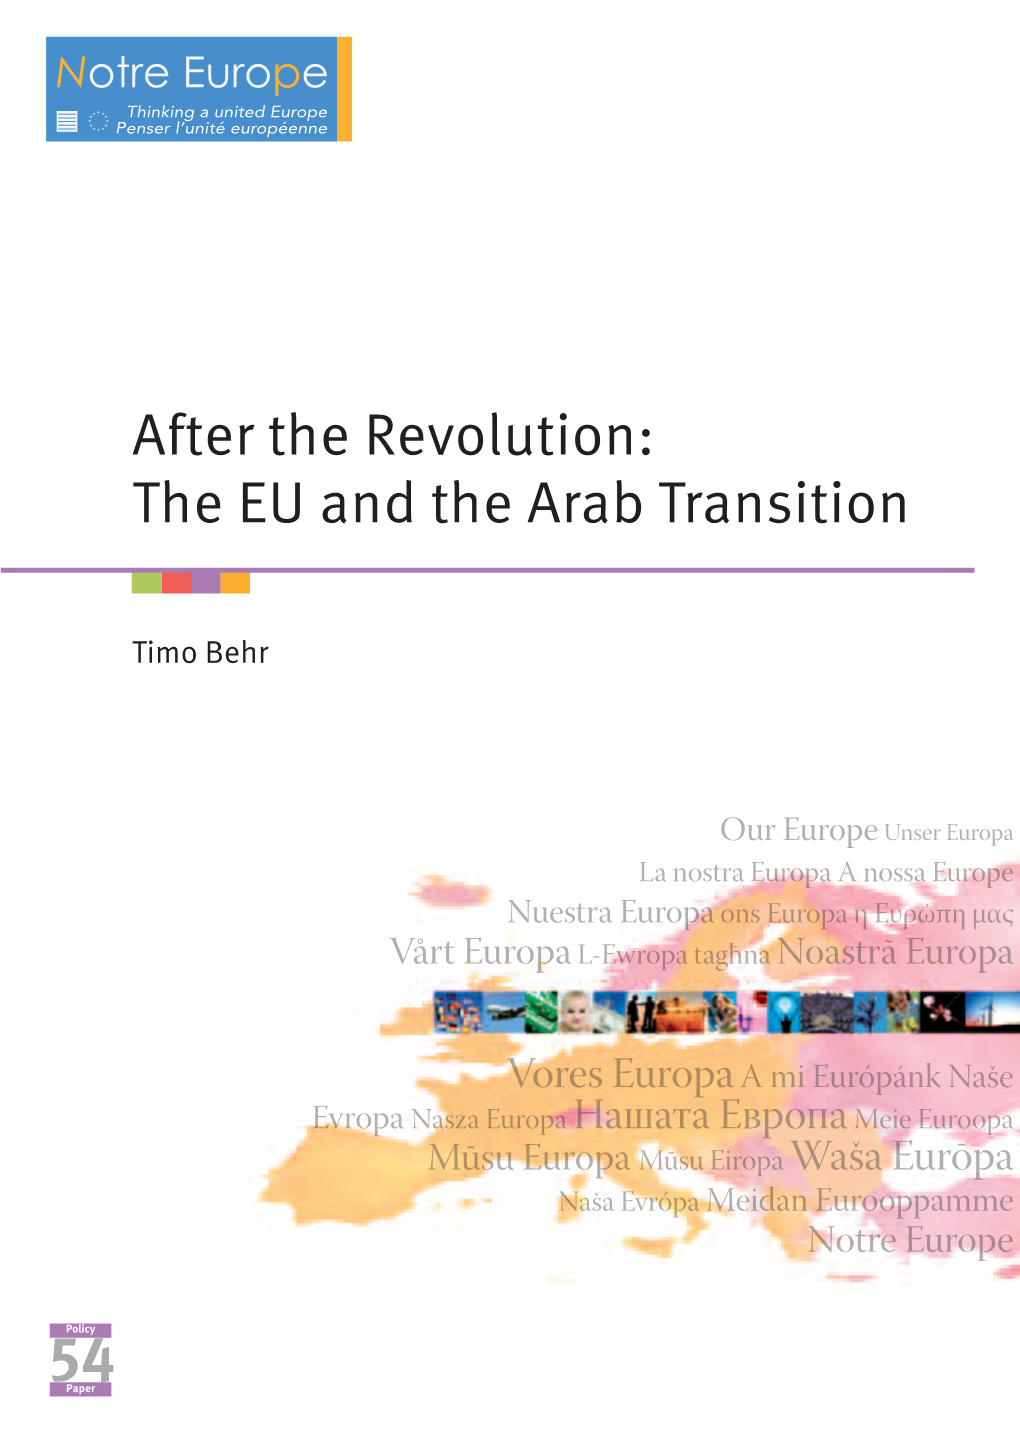 After the Revolution: the EU and the Arab Transition